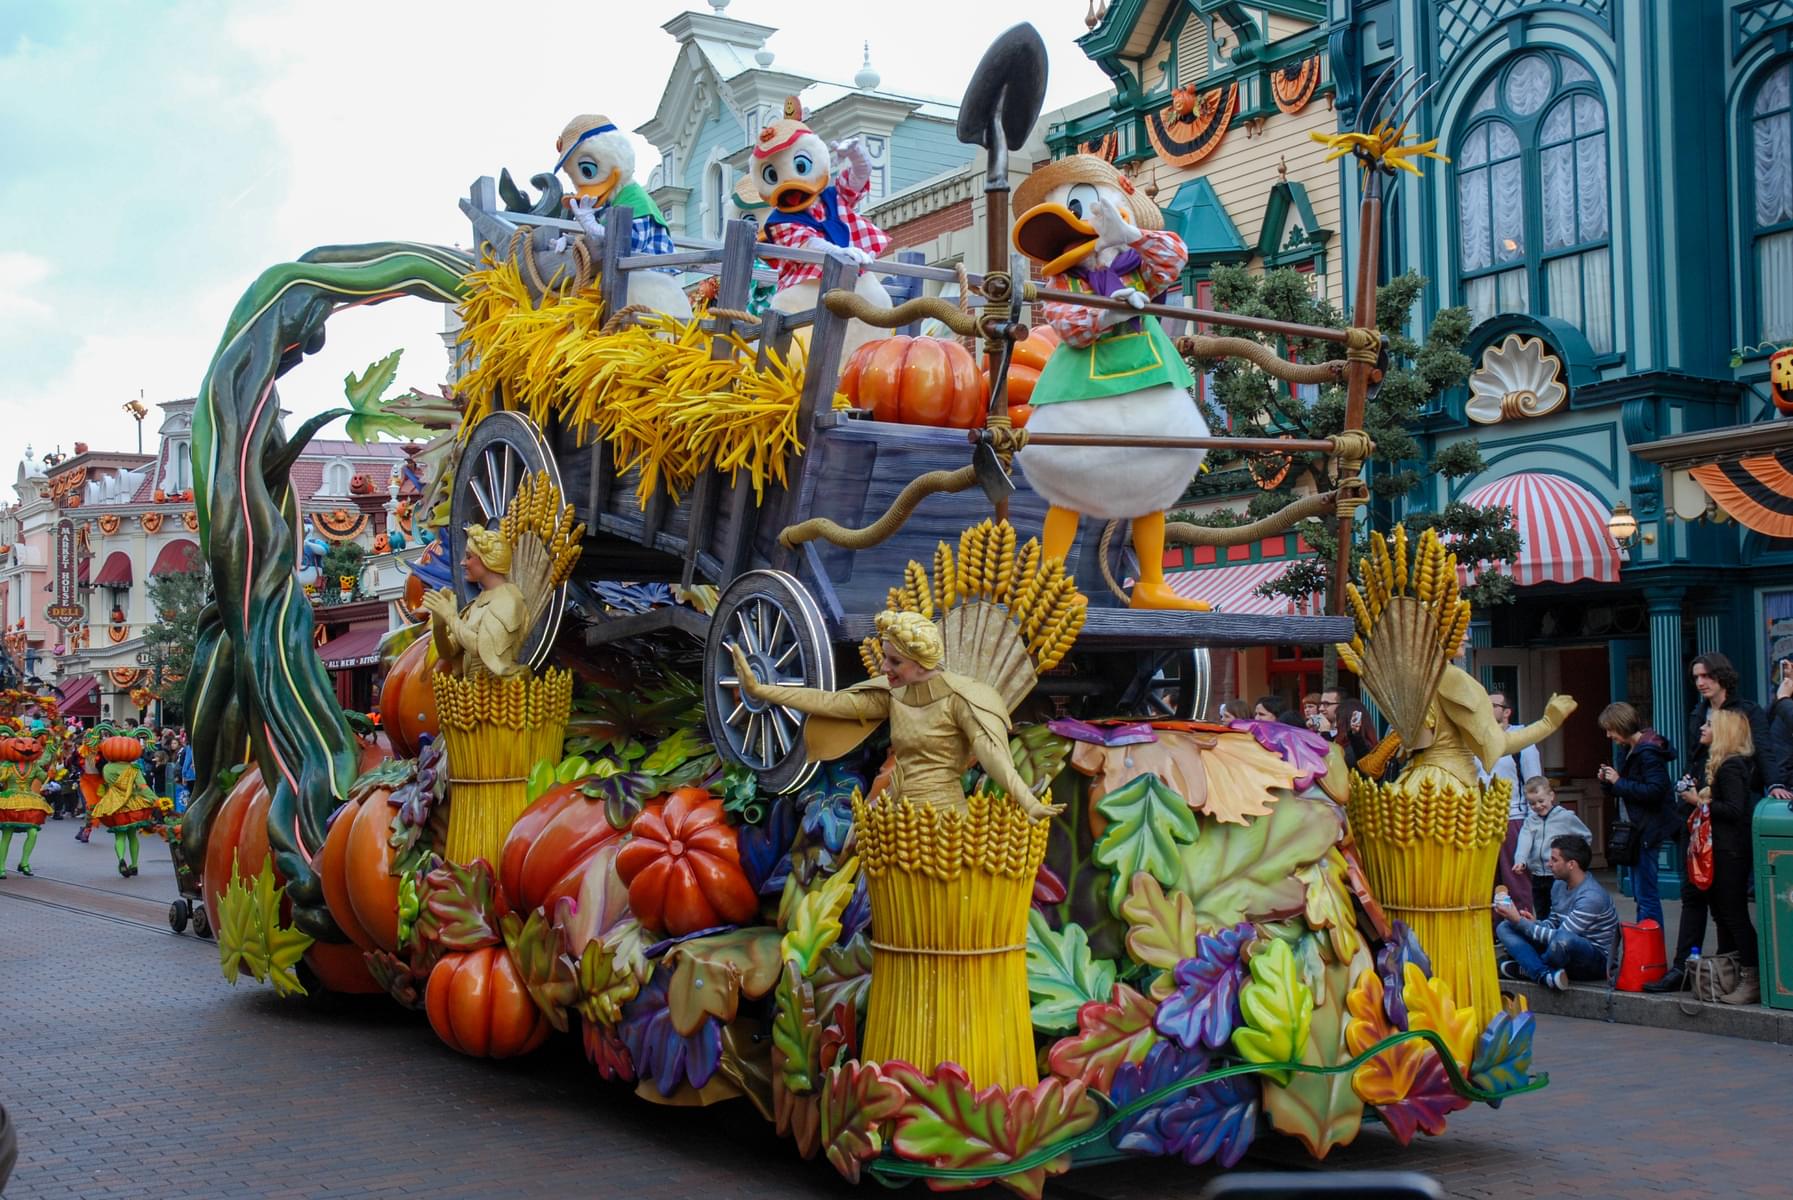 See the grand parade by our beloved characters